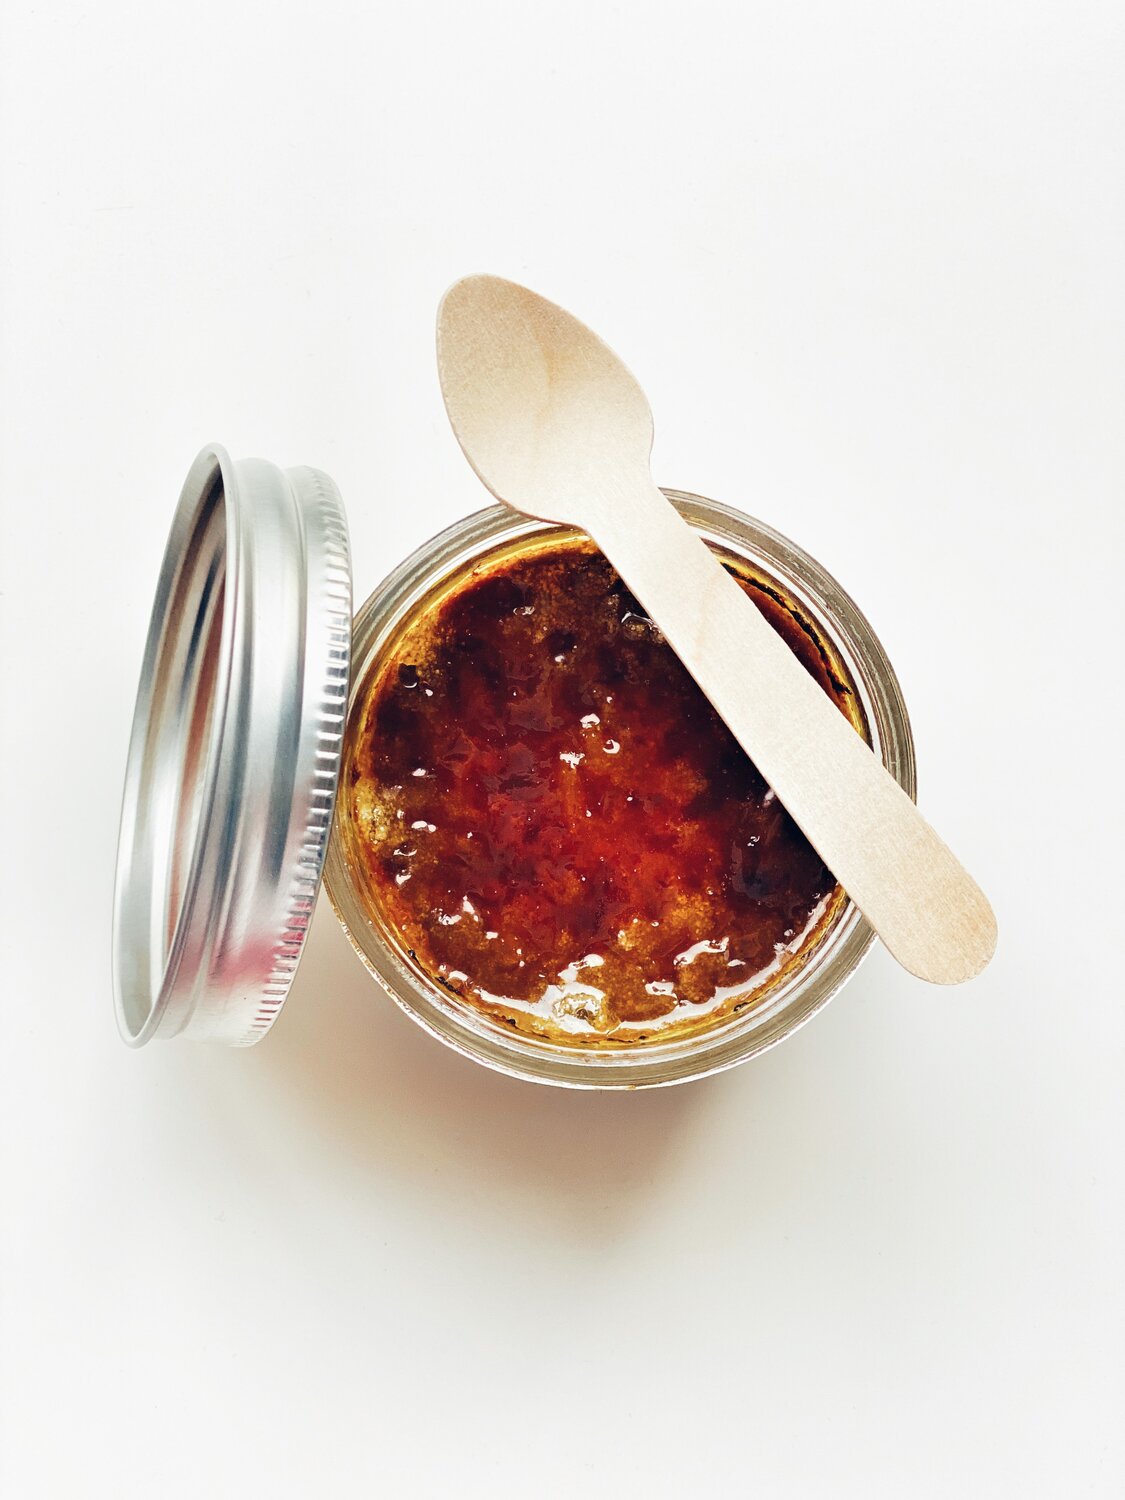 Learn to preserve your own jams and jellies on July 10 in Honesdale.